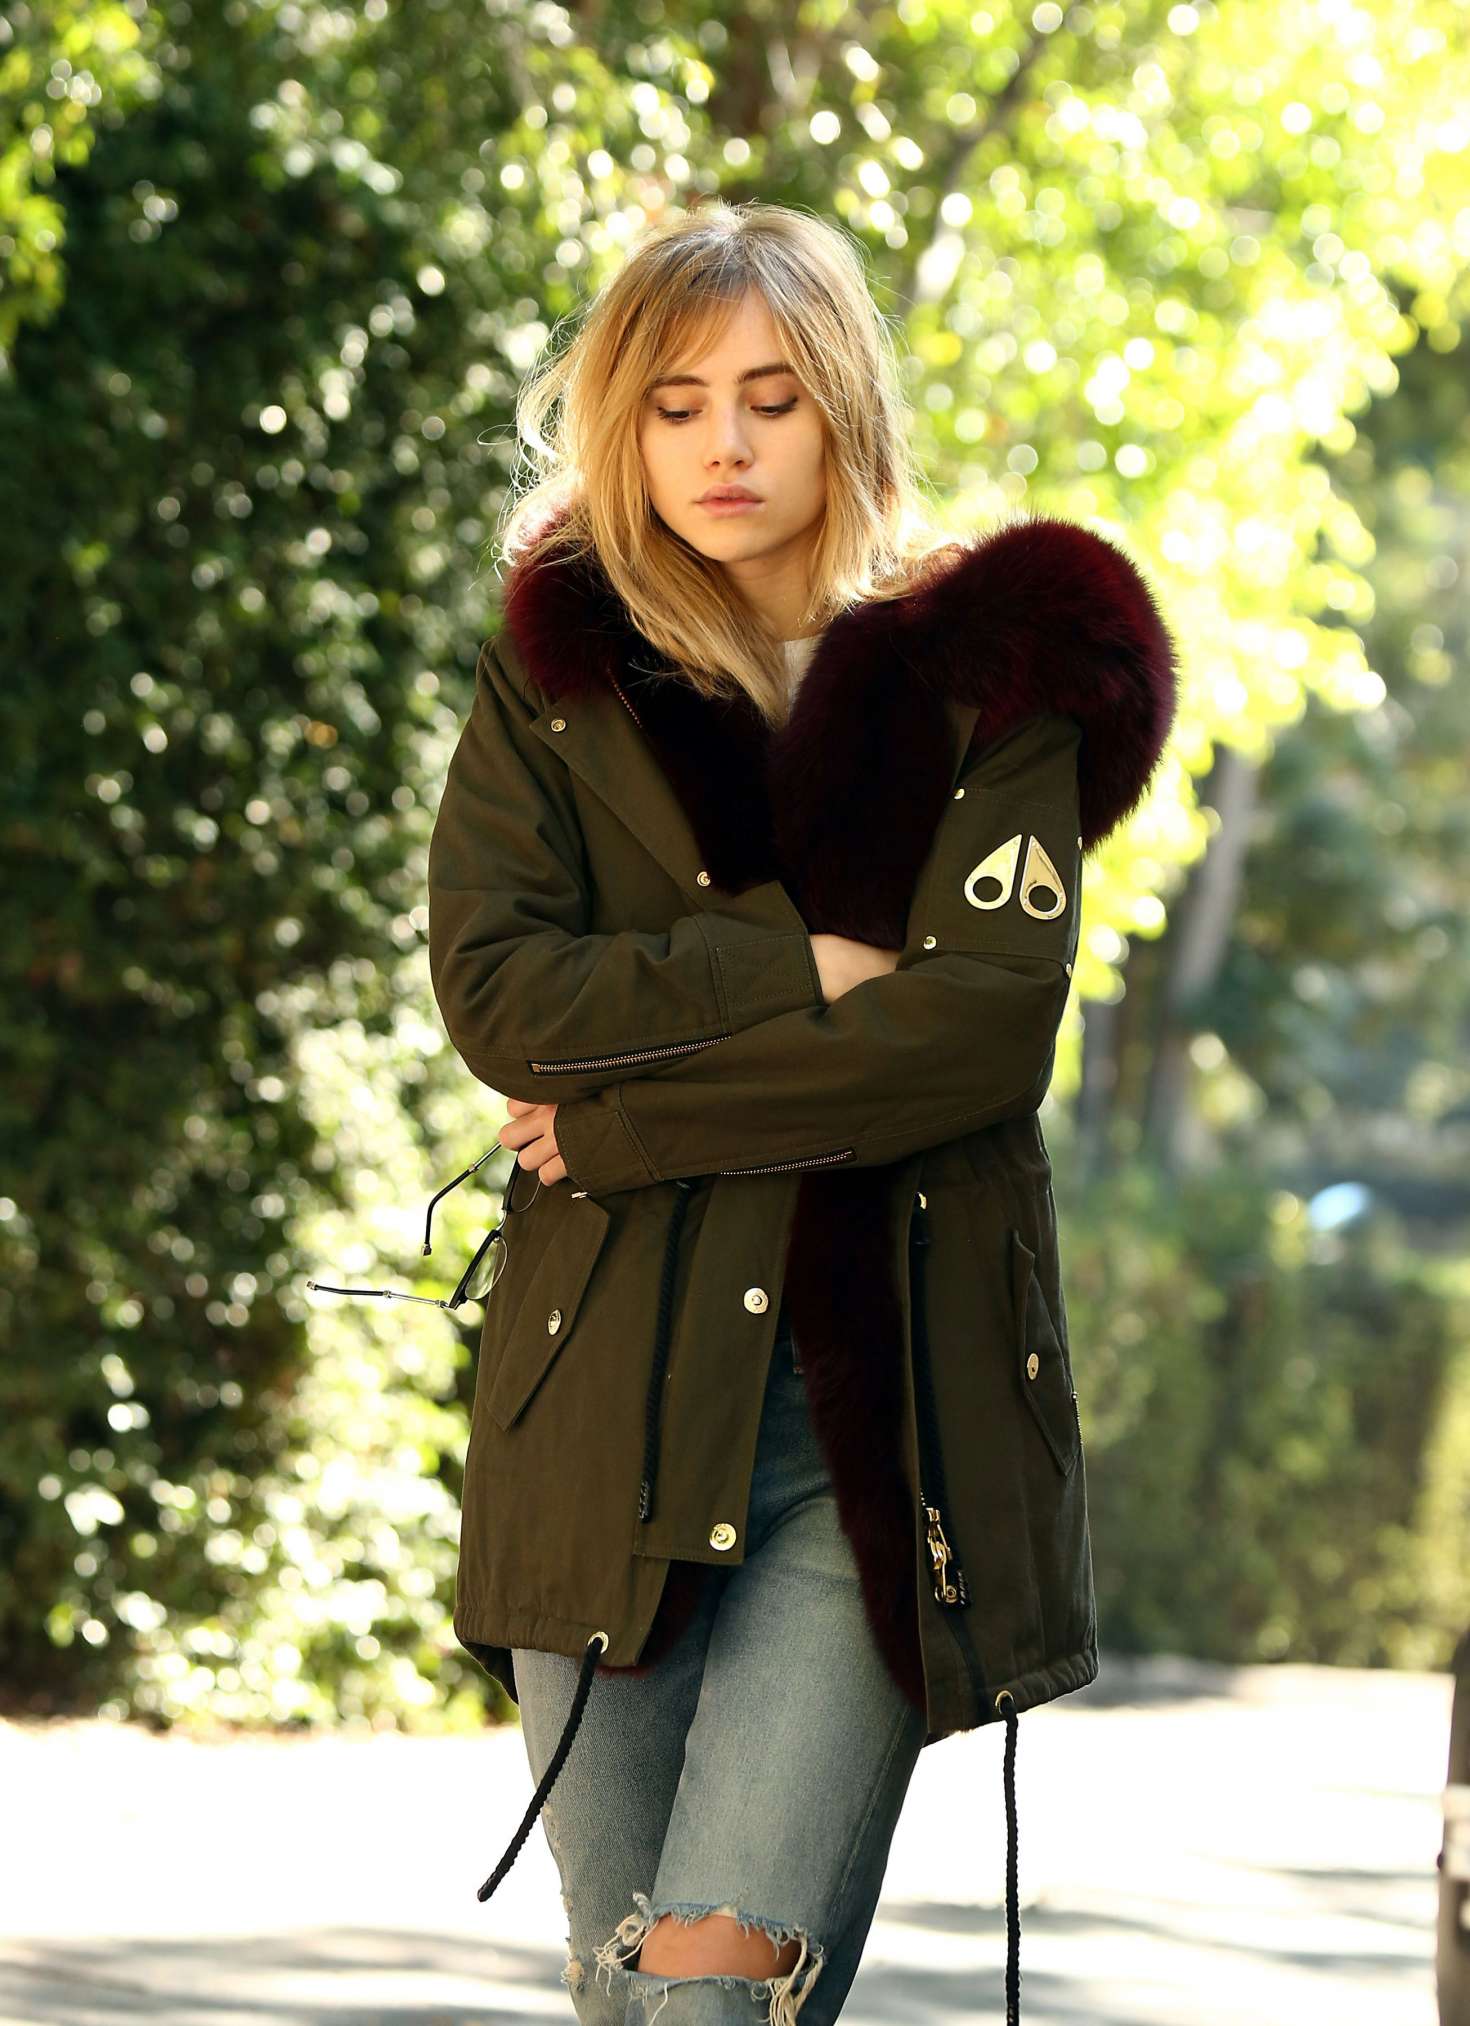 Suki Waterhouse Leaves a residence in Beverly Hills -09 | GotCeleb